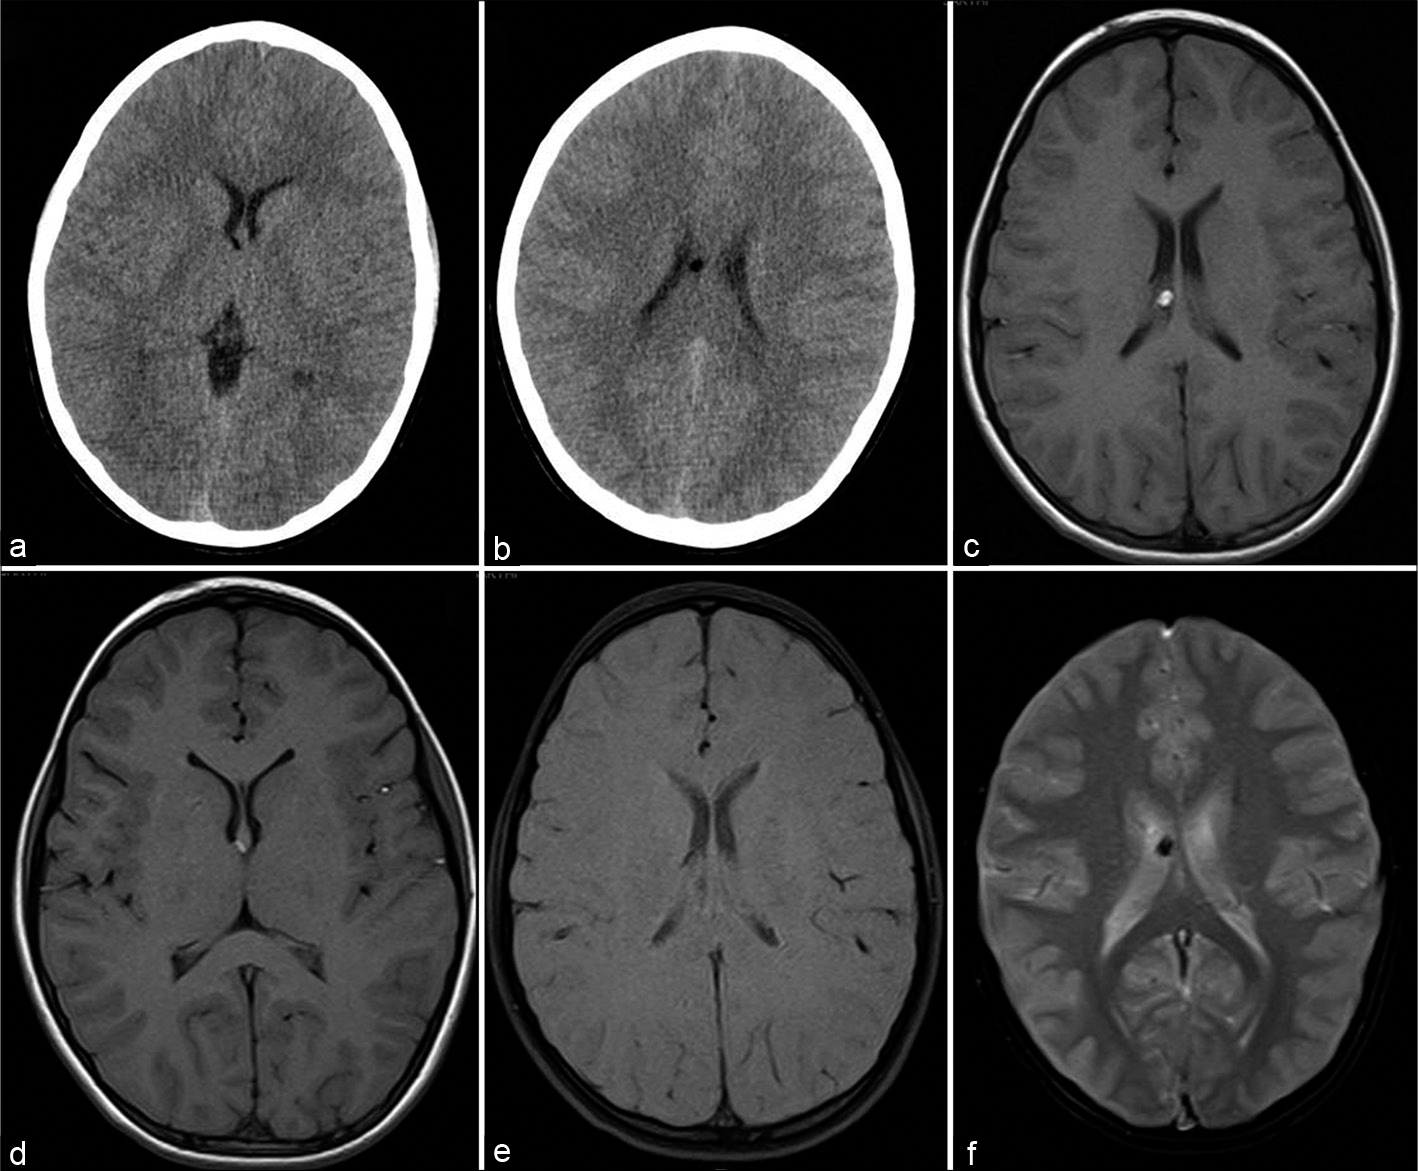 A 12-year-old boy asymptomatic CT axial sections at ventricular level (a and b), T1-weigted axial (c and d), T1 with fat saturation (e), and gradient-echo GRE T2* axial (f) sections showing small fat specks along the right fornix with susceptibility effect.